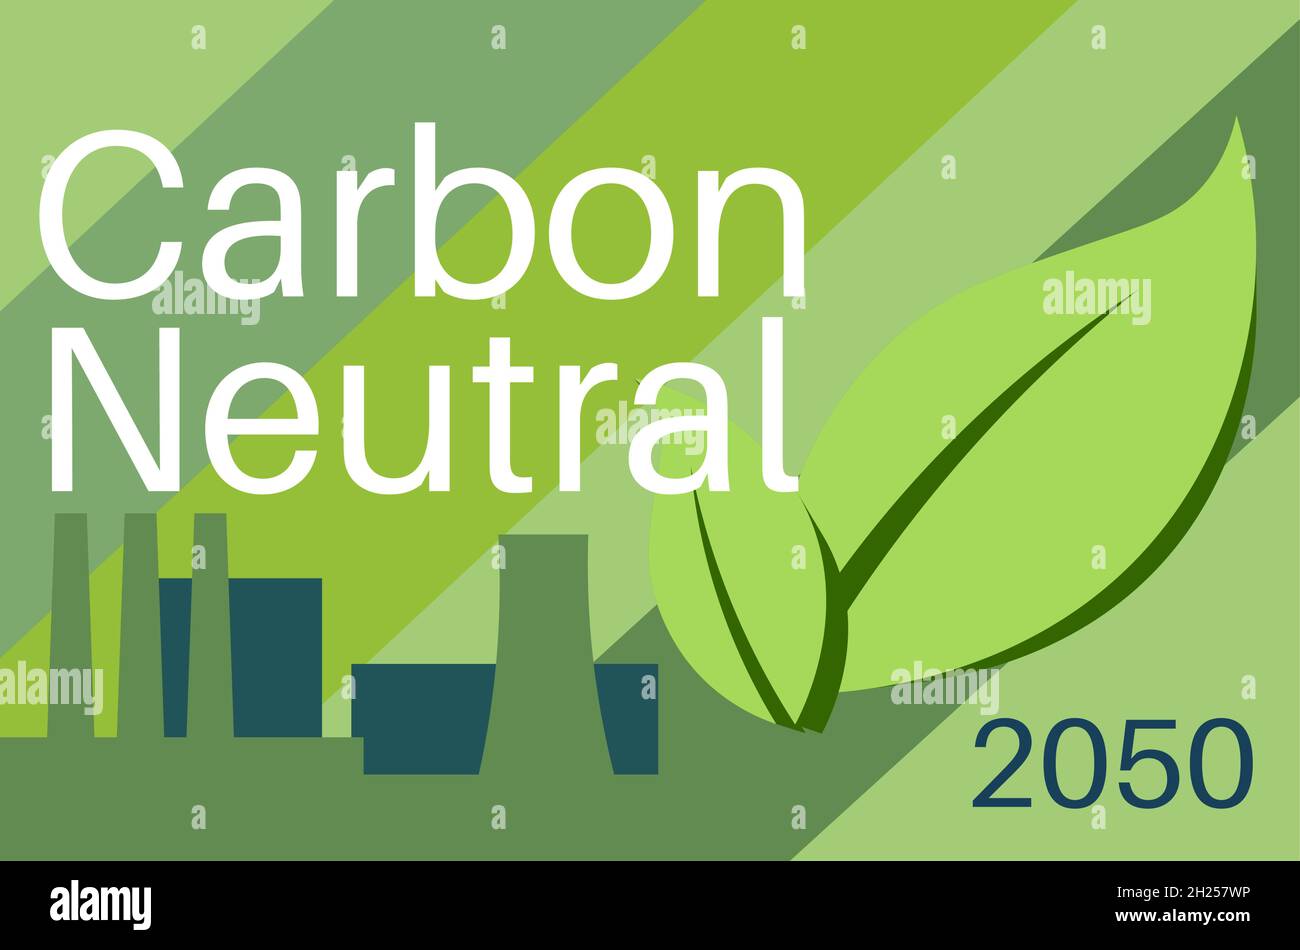 Carbon Neutral vector illustration Co2 Neutral consept on a green background Stock Vector